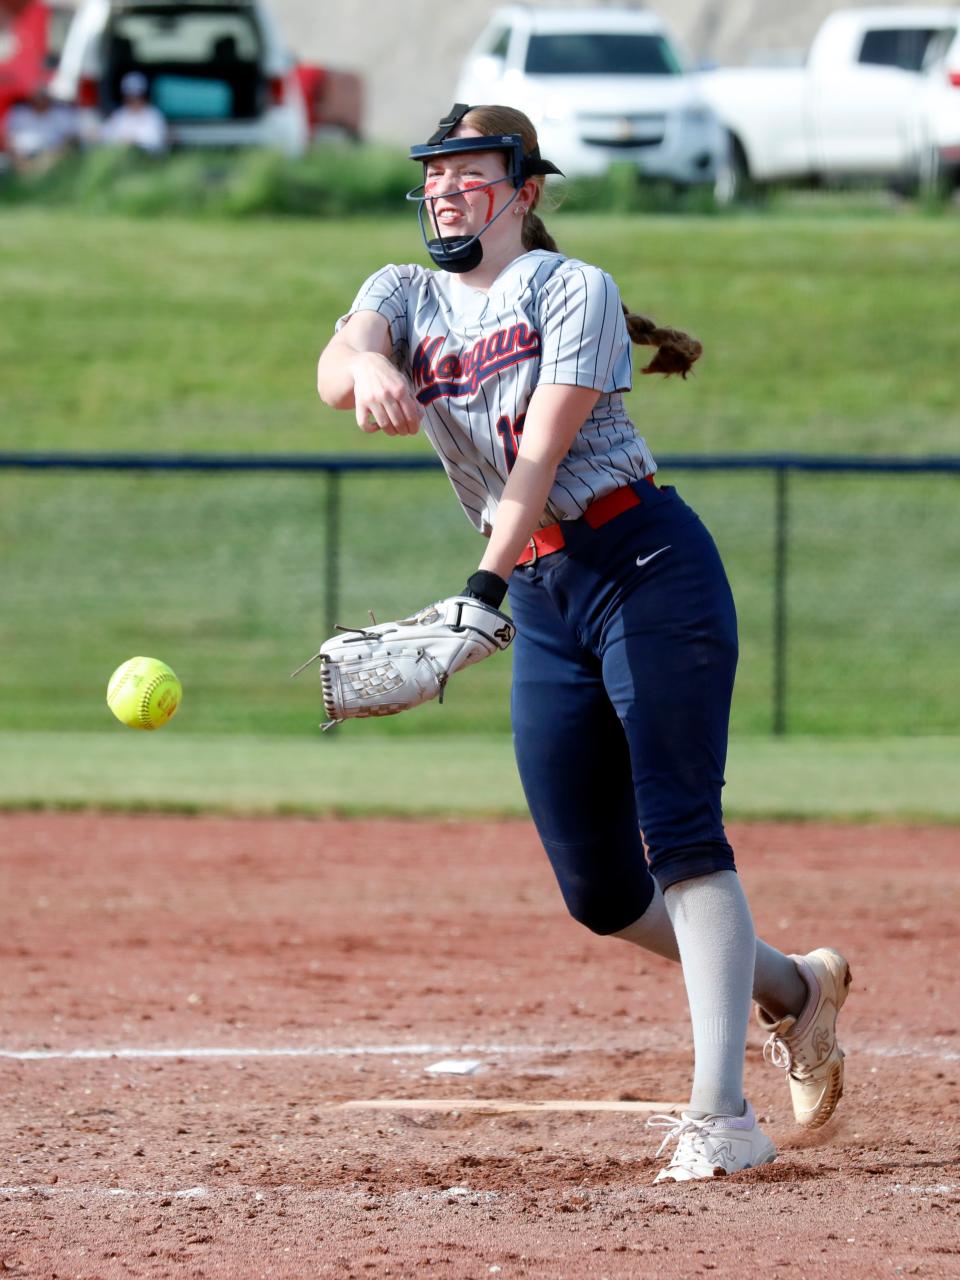 Malayni Clemens fires a pitch during the third inning of Morgan's 14-0 mercy against visiting Philo on Wednesday in a Division II sectional tournament game in McConnelsville. Clemens pitched four hitless innings to get the win.